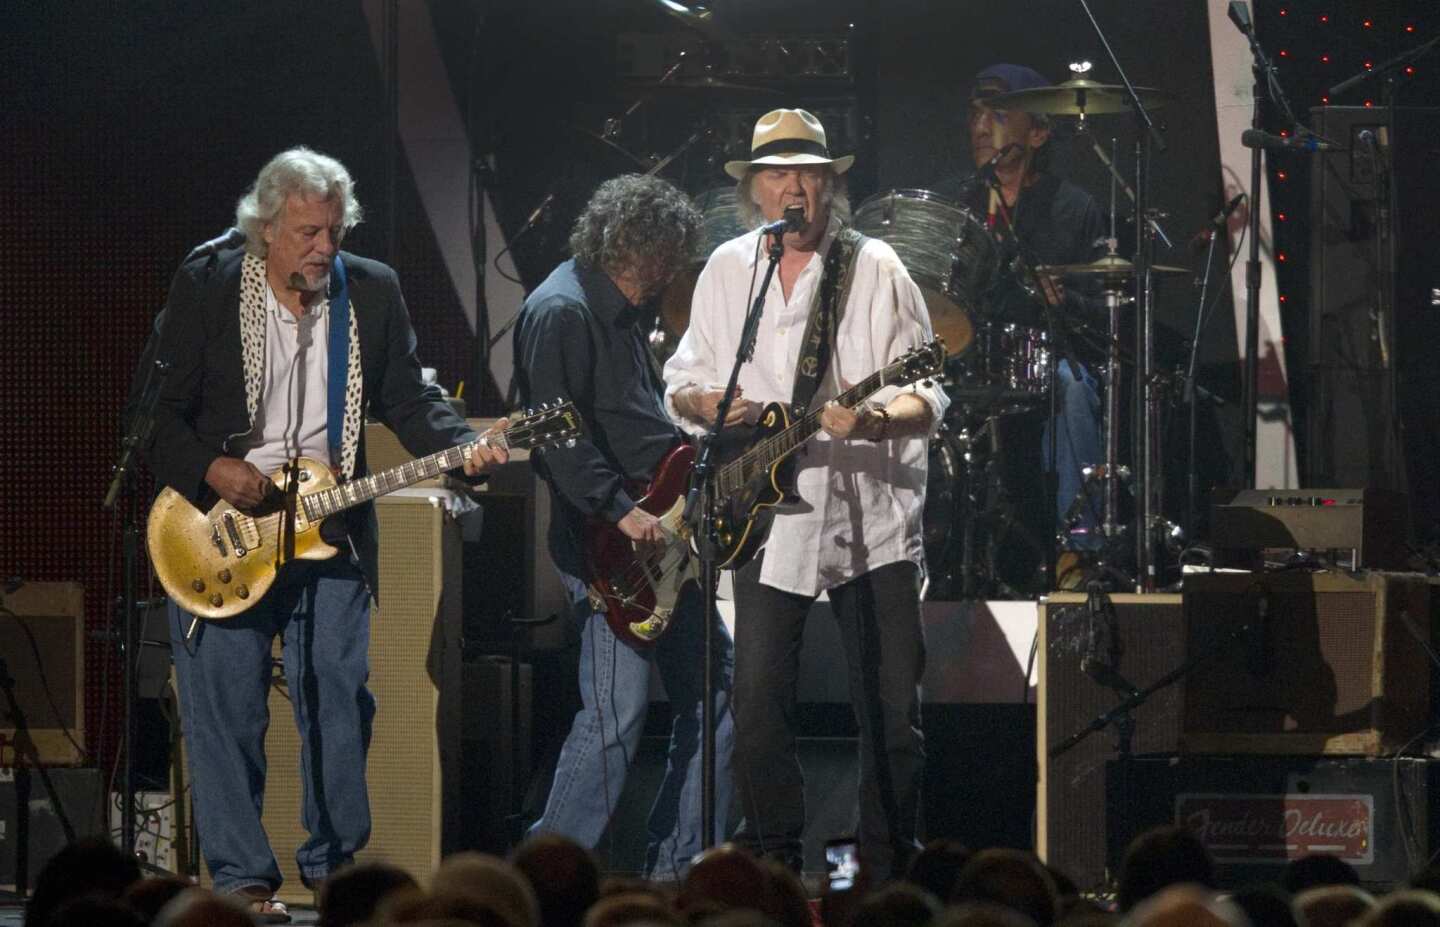 Neil Young & Crazy Horse sing "I Saw Her Standing There."